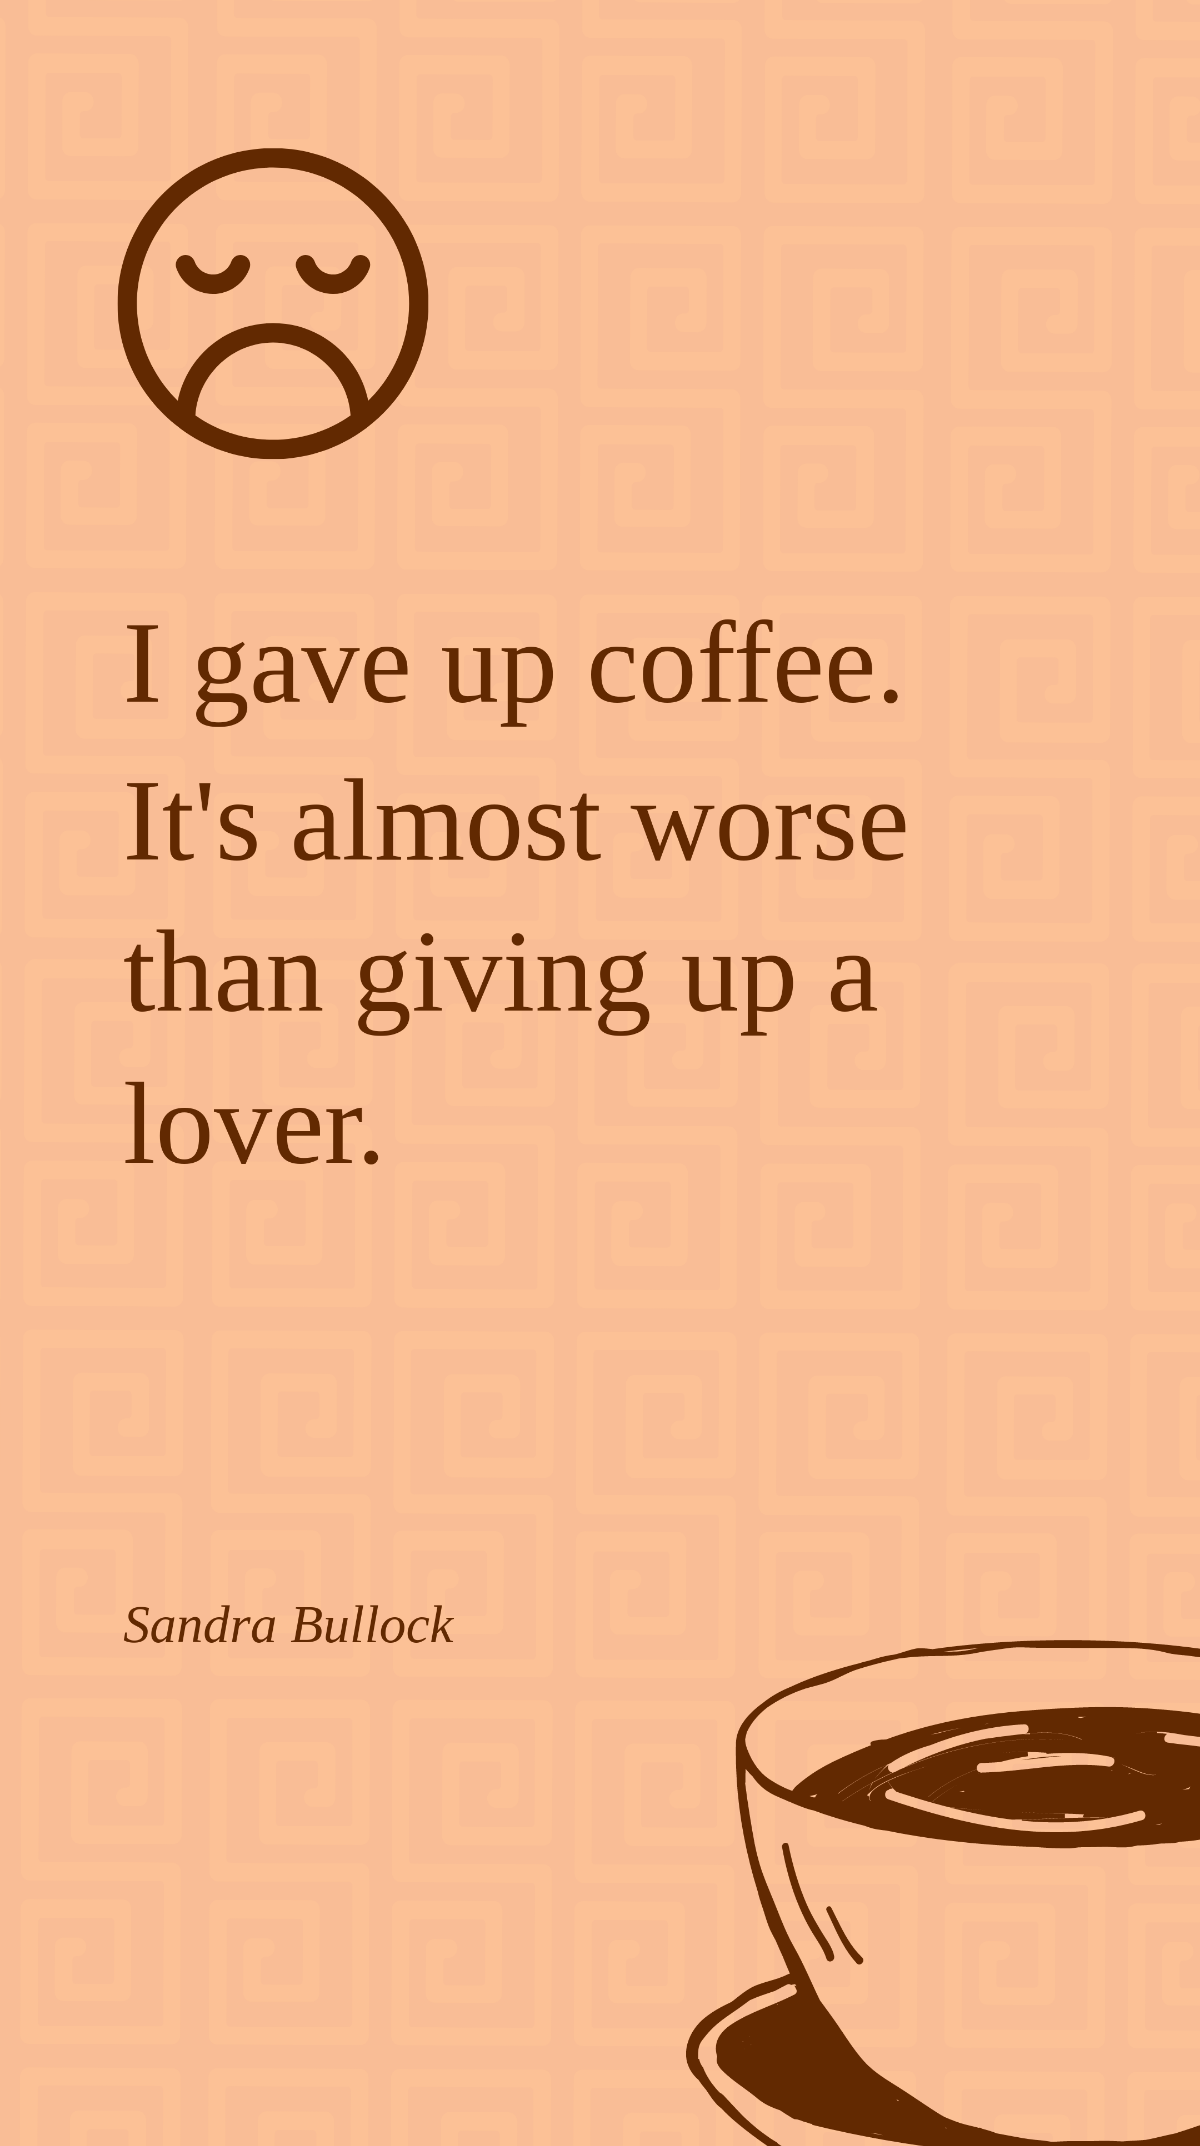 Sandra Bullock - I gave up coffee. It's almost worse than giving up a lover.